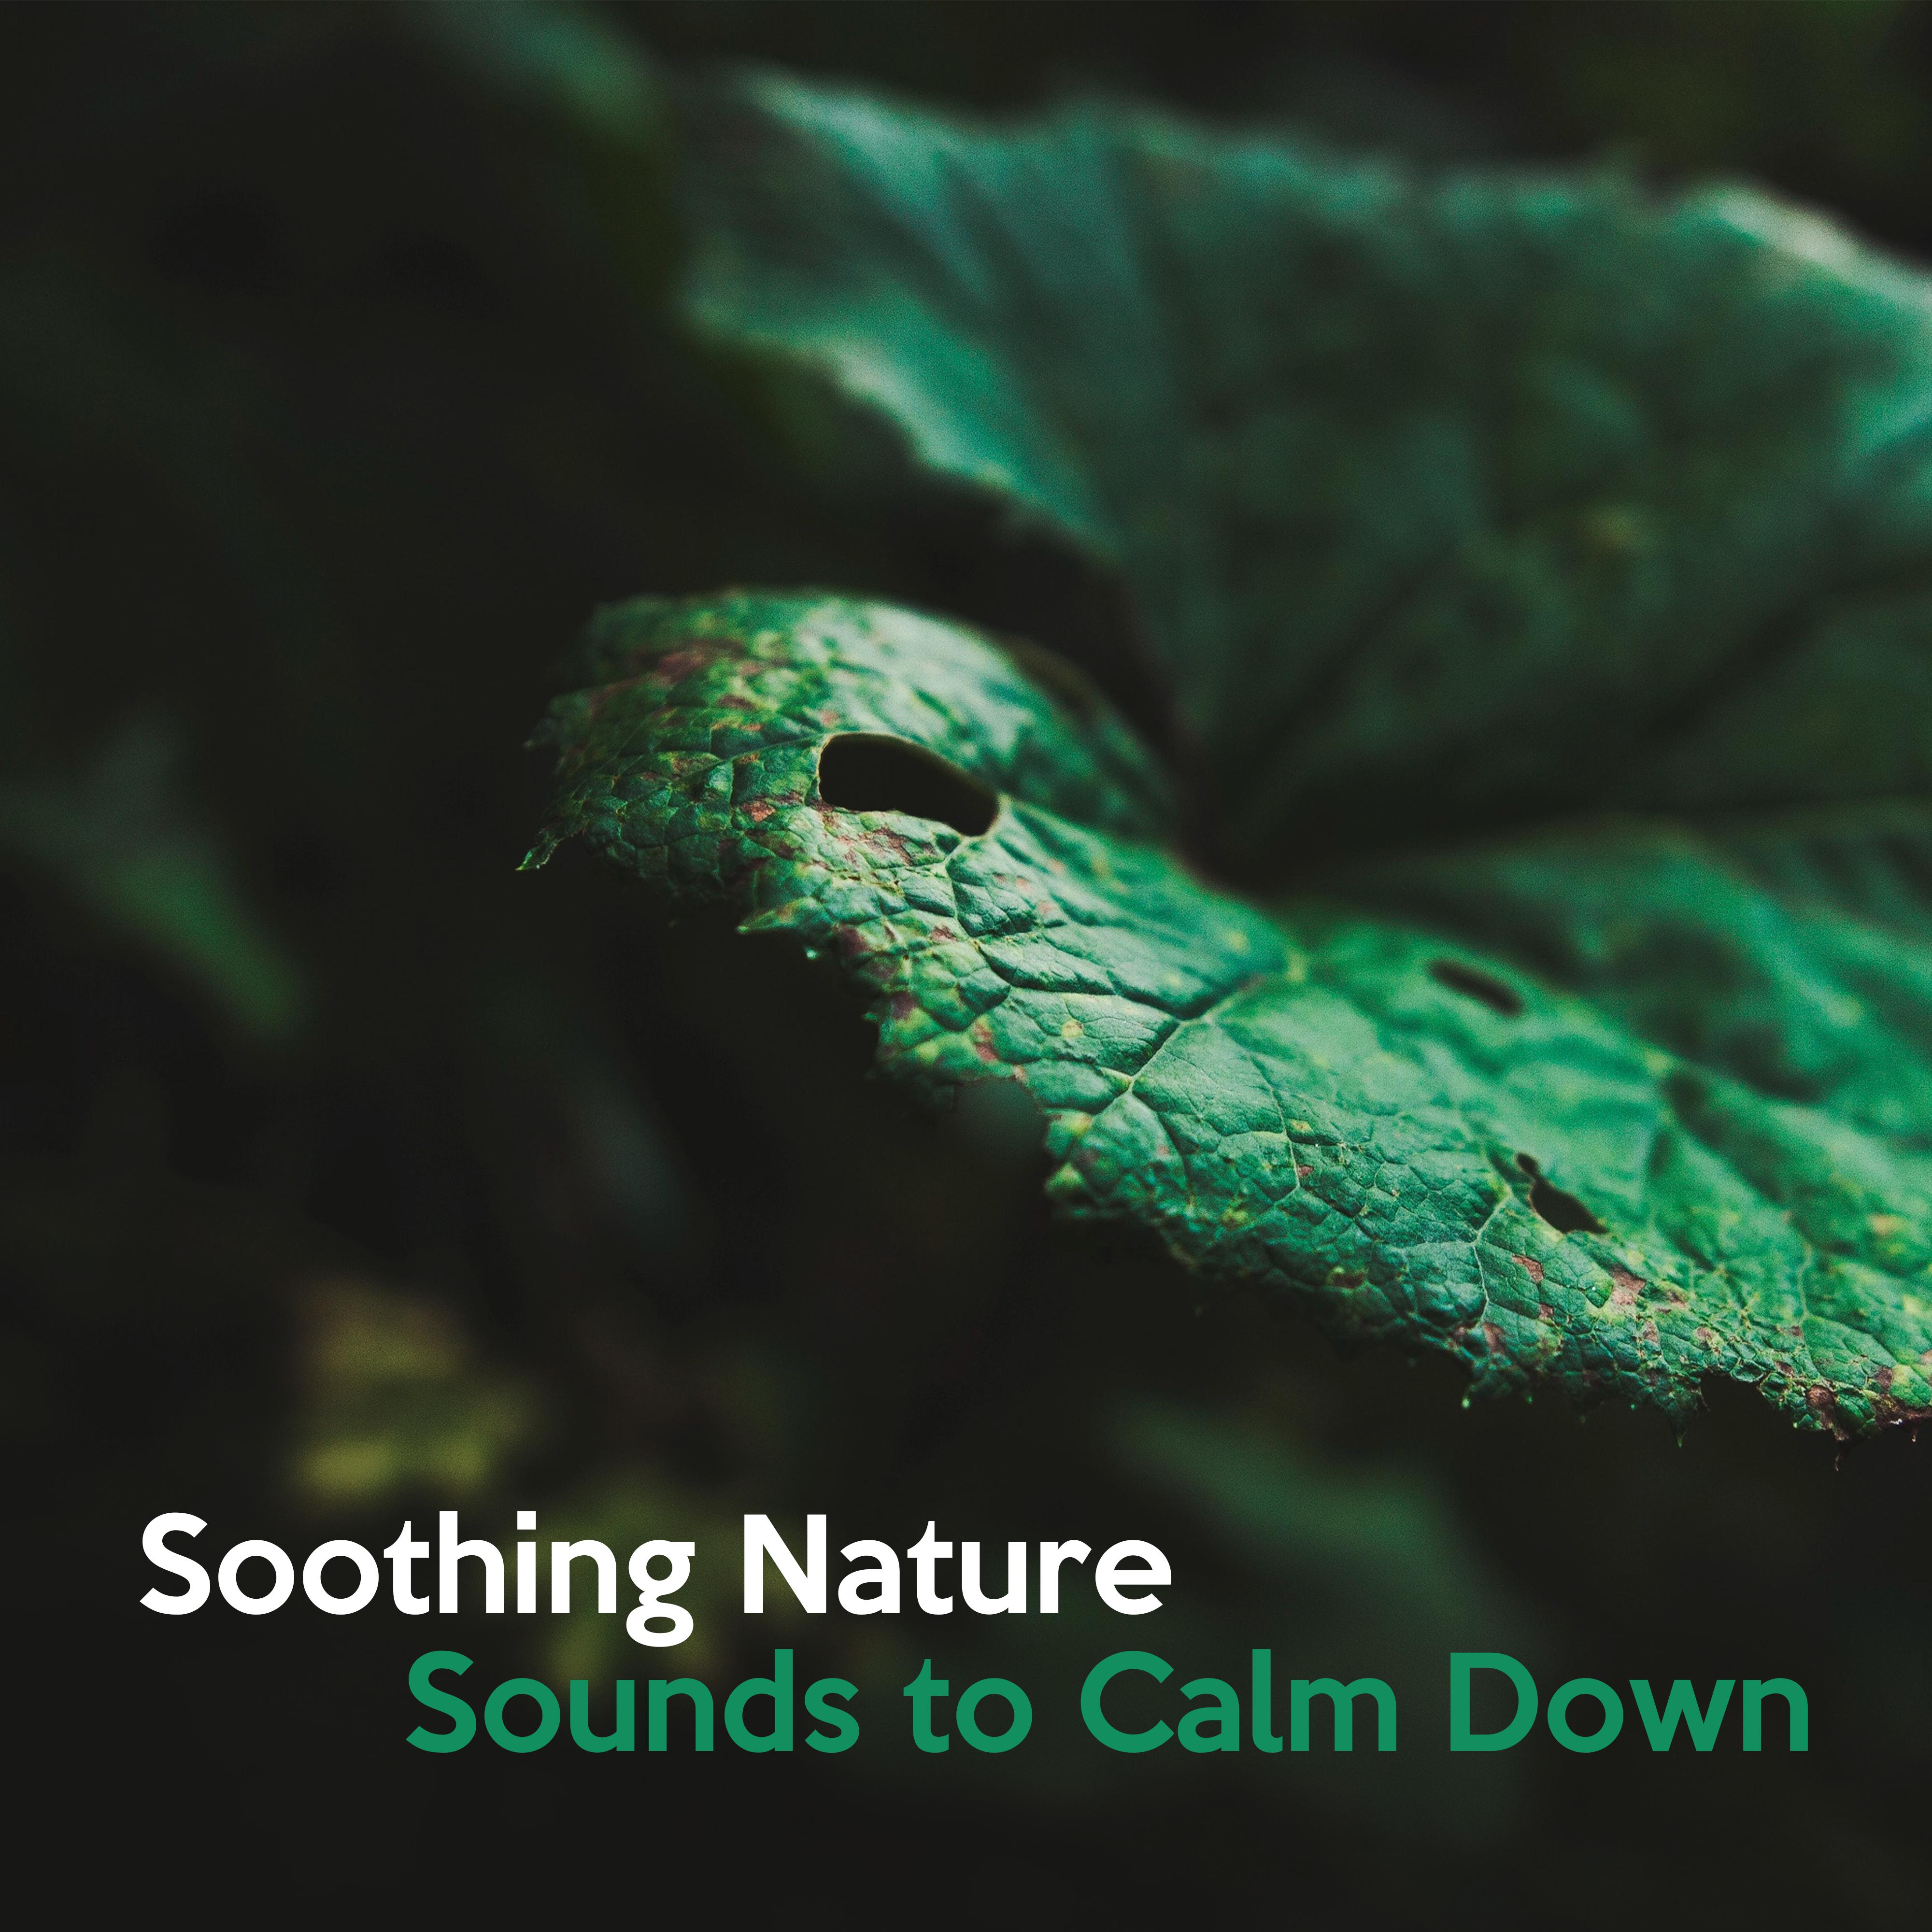 Soothing Nature Sounds to Calm Down – Peaceful Nature Waves, Spiritual Journey, Inner Calmness, Stress Free, New Age Music